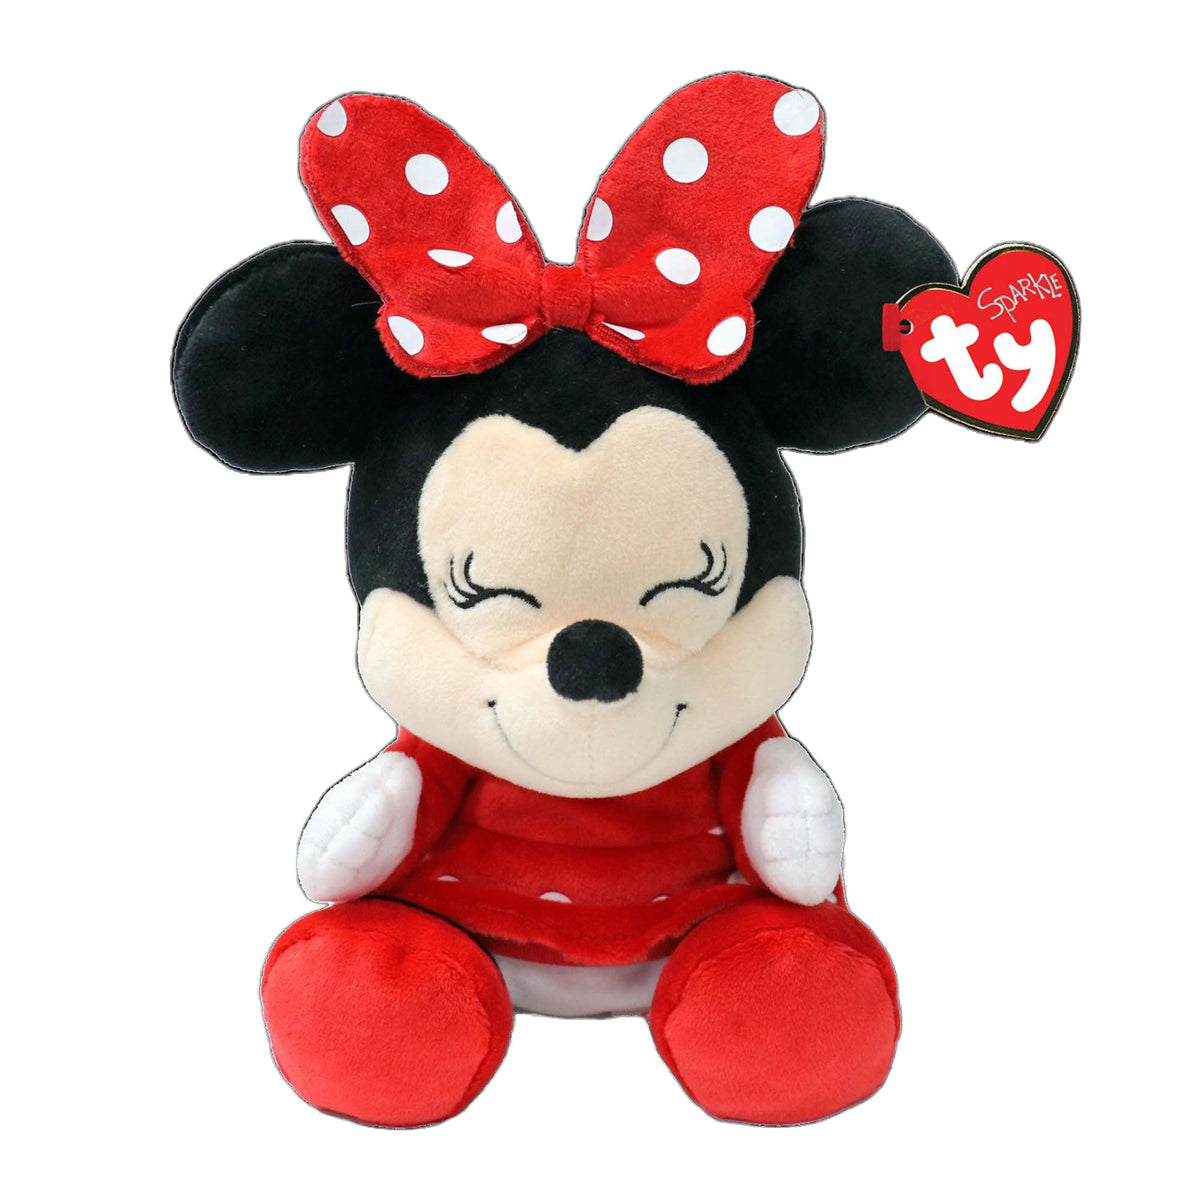 TY INC Plushes TY Disney Soft Plush, Minnie Mouse, 8 Inches, 1 Count